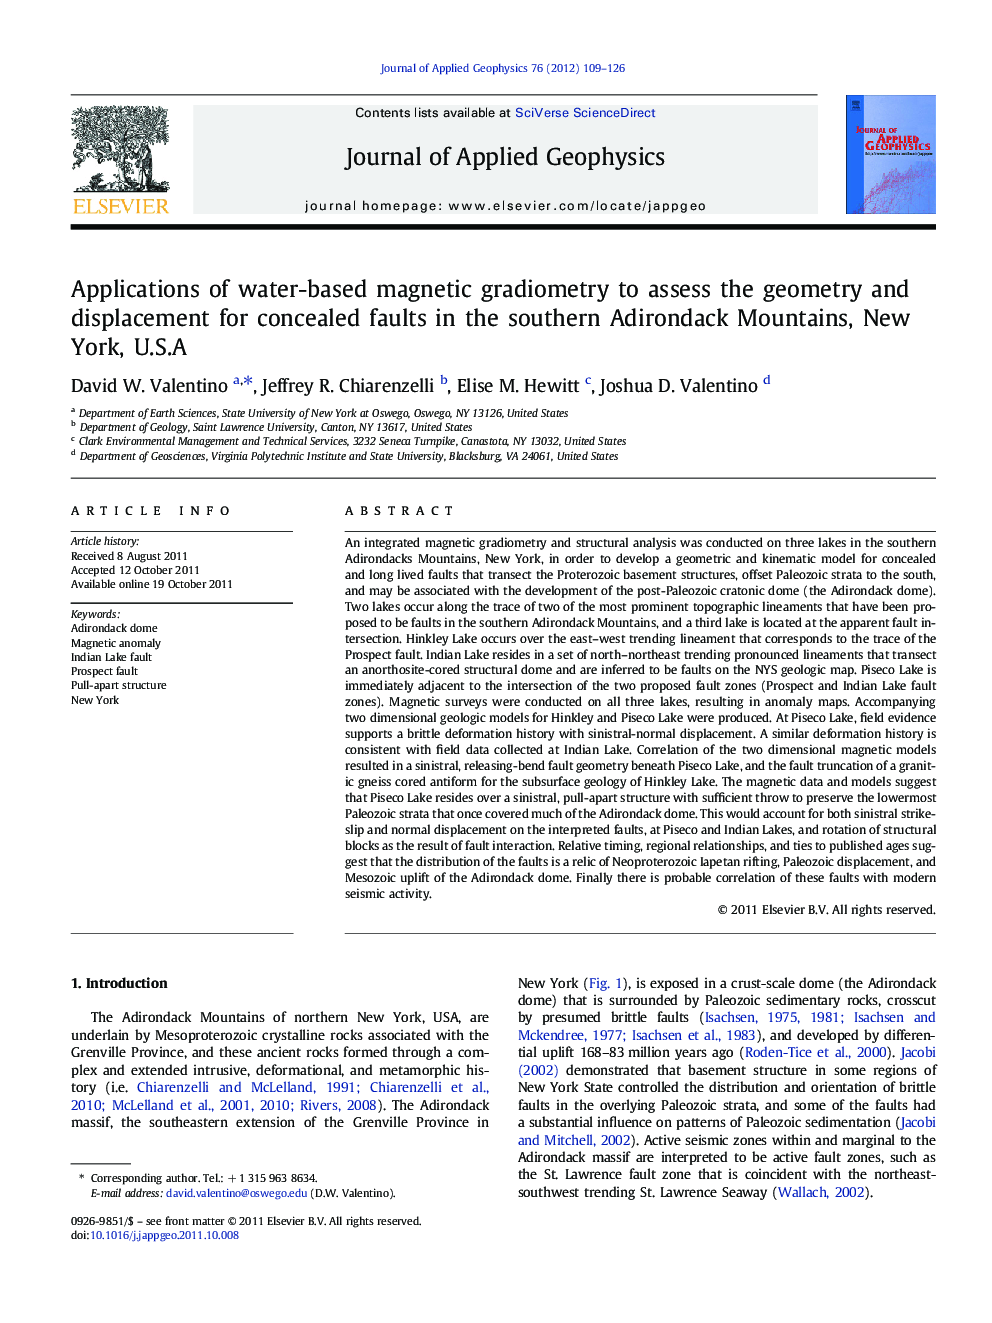 Applications of water-based magnetic gradiometry to assess the geometry and displacement for concealed faults in the southern Adirondack Mountains, New York, U.S.A